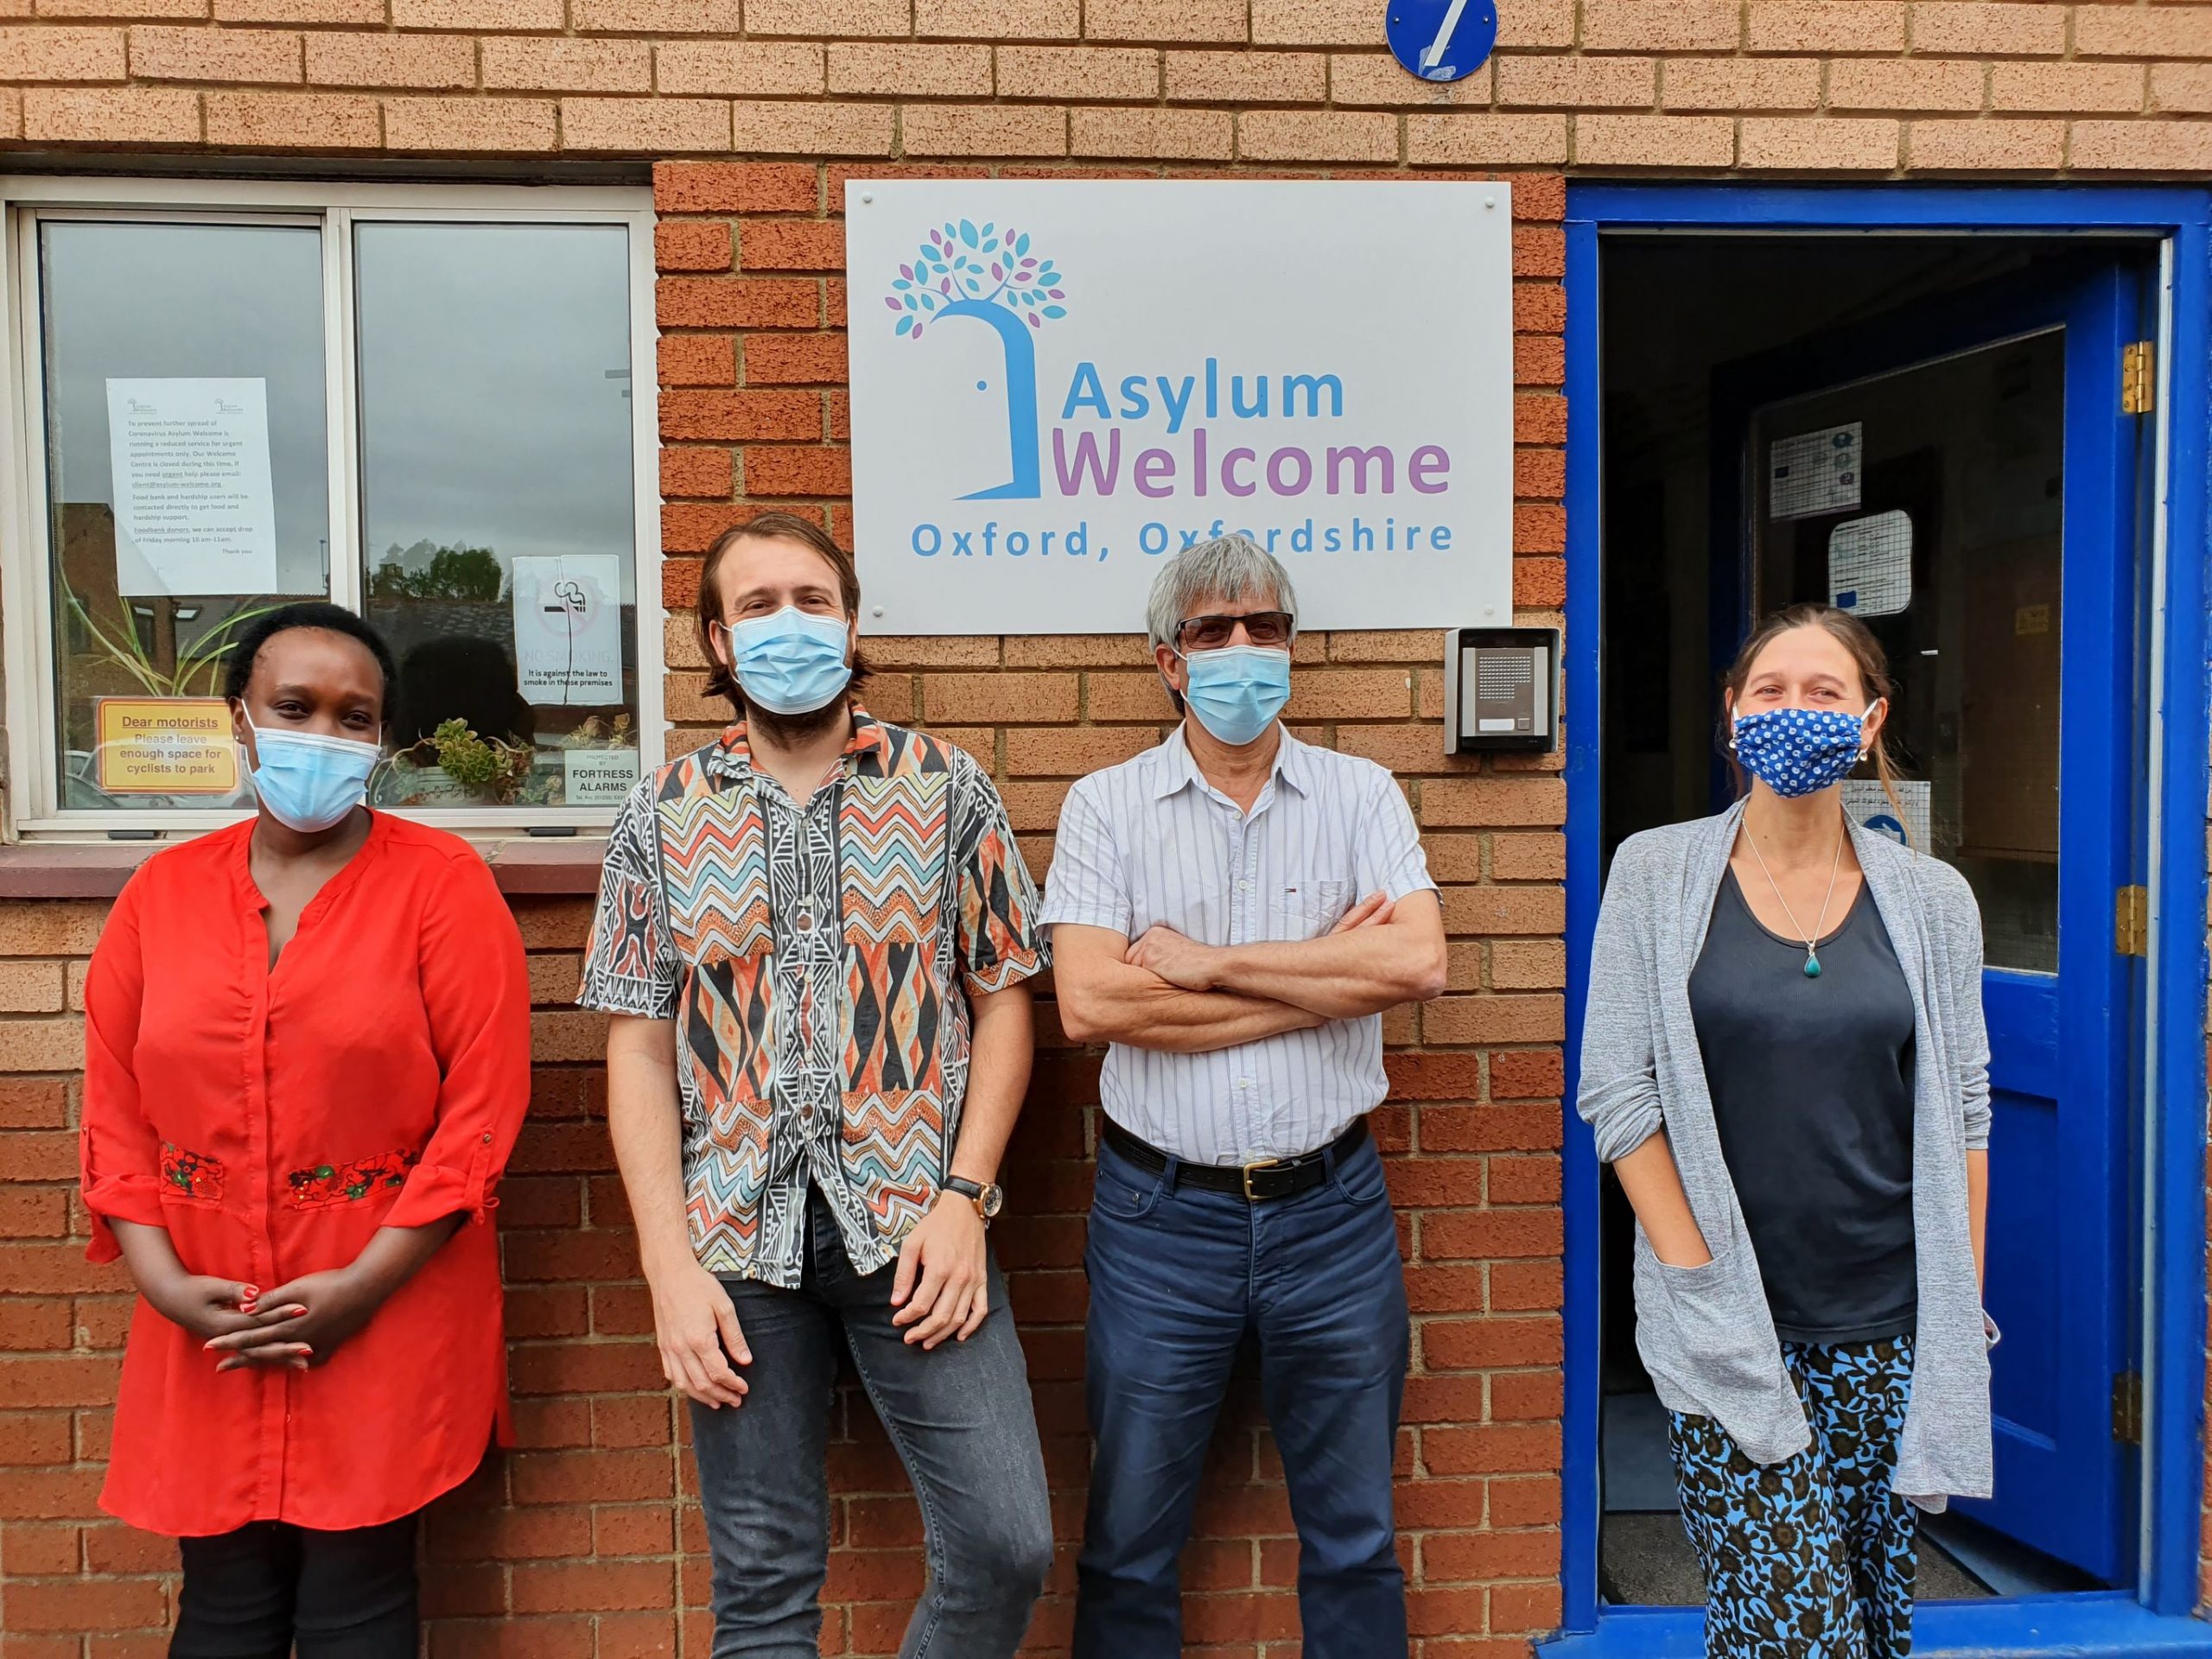 Four adults wearing masks in front of Asylum Welcome. From left to right: Caritas Umulisa, Simon Dawson, Almas Farzi ('Navid'), Helena Cullen